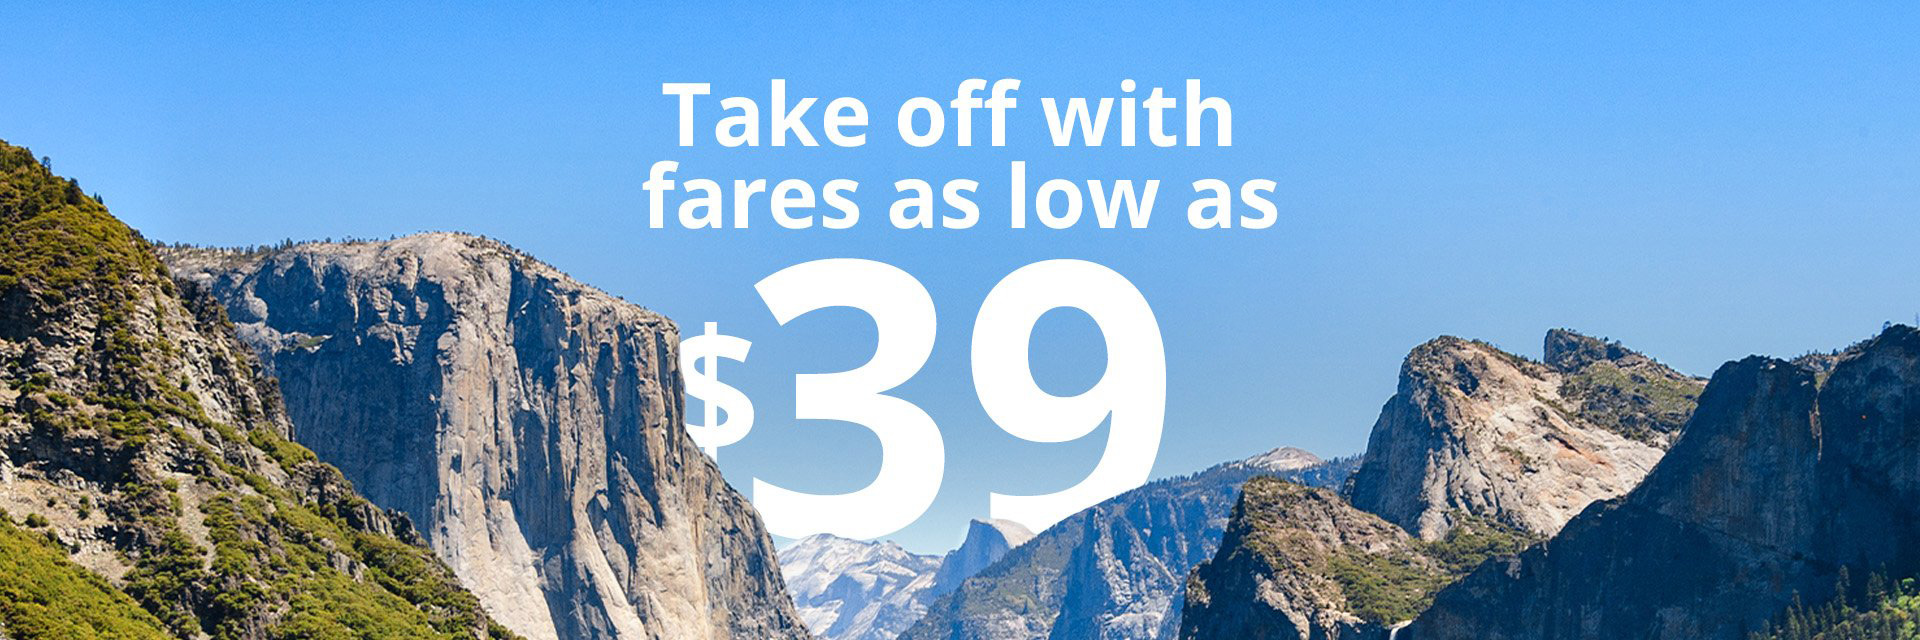 $39 One-Way Fares On United Airlines &#8211; Live and Let&#039;s Fly United Airlines 2022 Fare Sale